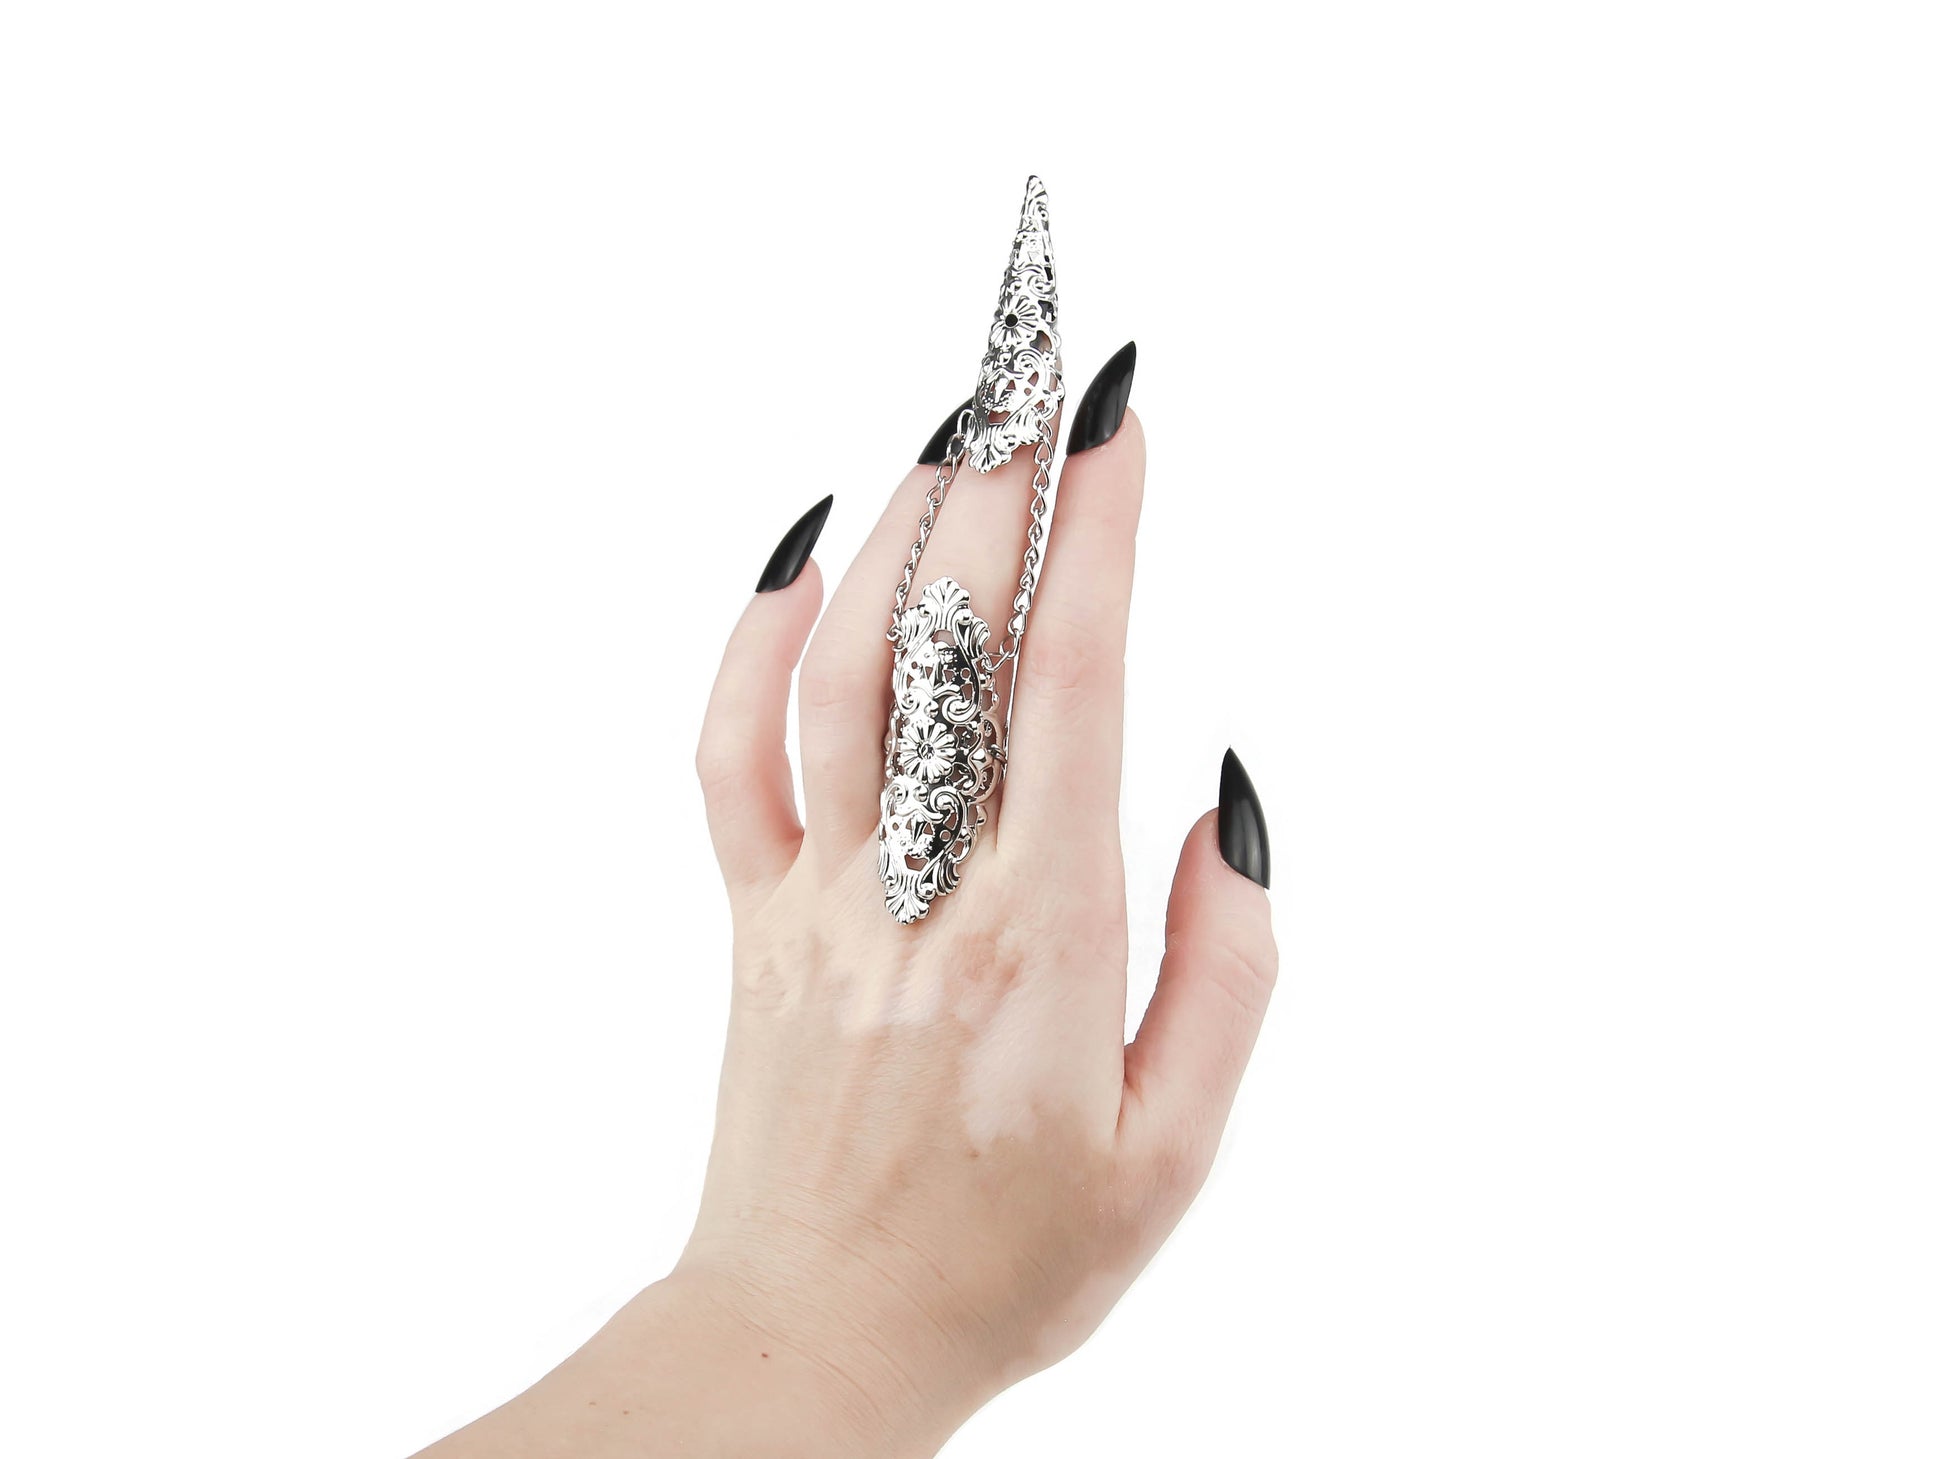 A hand models a Myril Jewels silver claw ring, its intricate black filigree embracing the wearer’s middle finger with gothic grace. This piece is a testament to the neo-goth aesthetic, a perfect addition to a Halloween ensemble or punk look. Designed for those who favor gothic-chic and whimsigoth trends, it's versatile enough for everyday wear, rave parties, or festivals, and makes a bold statement as a gift for a goth girlfriend.